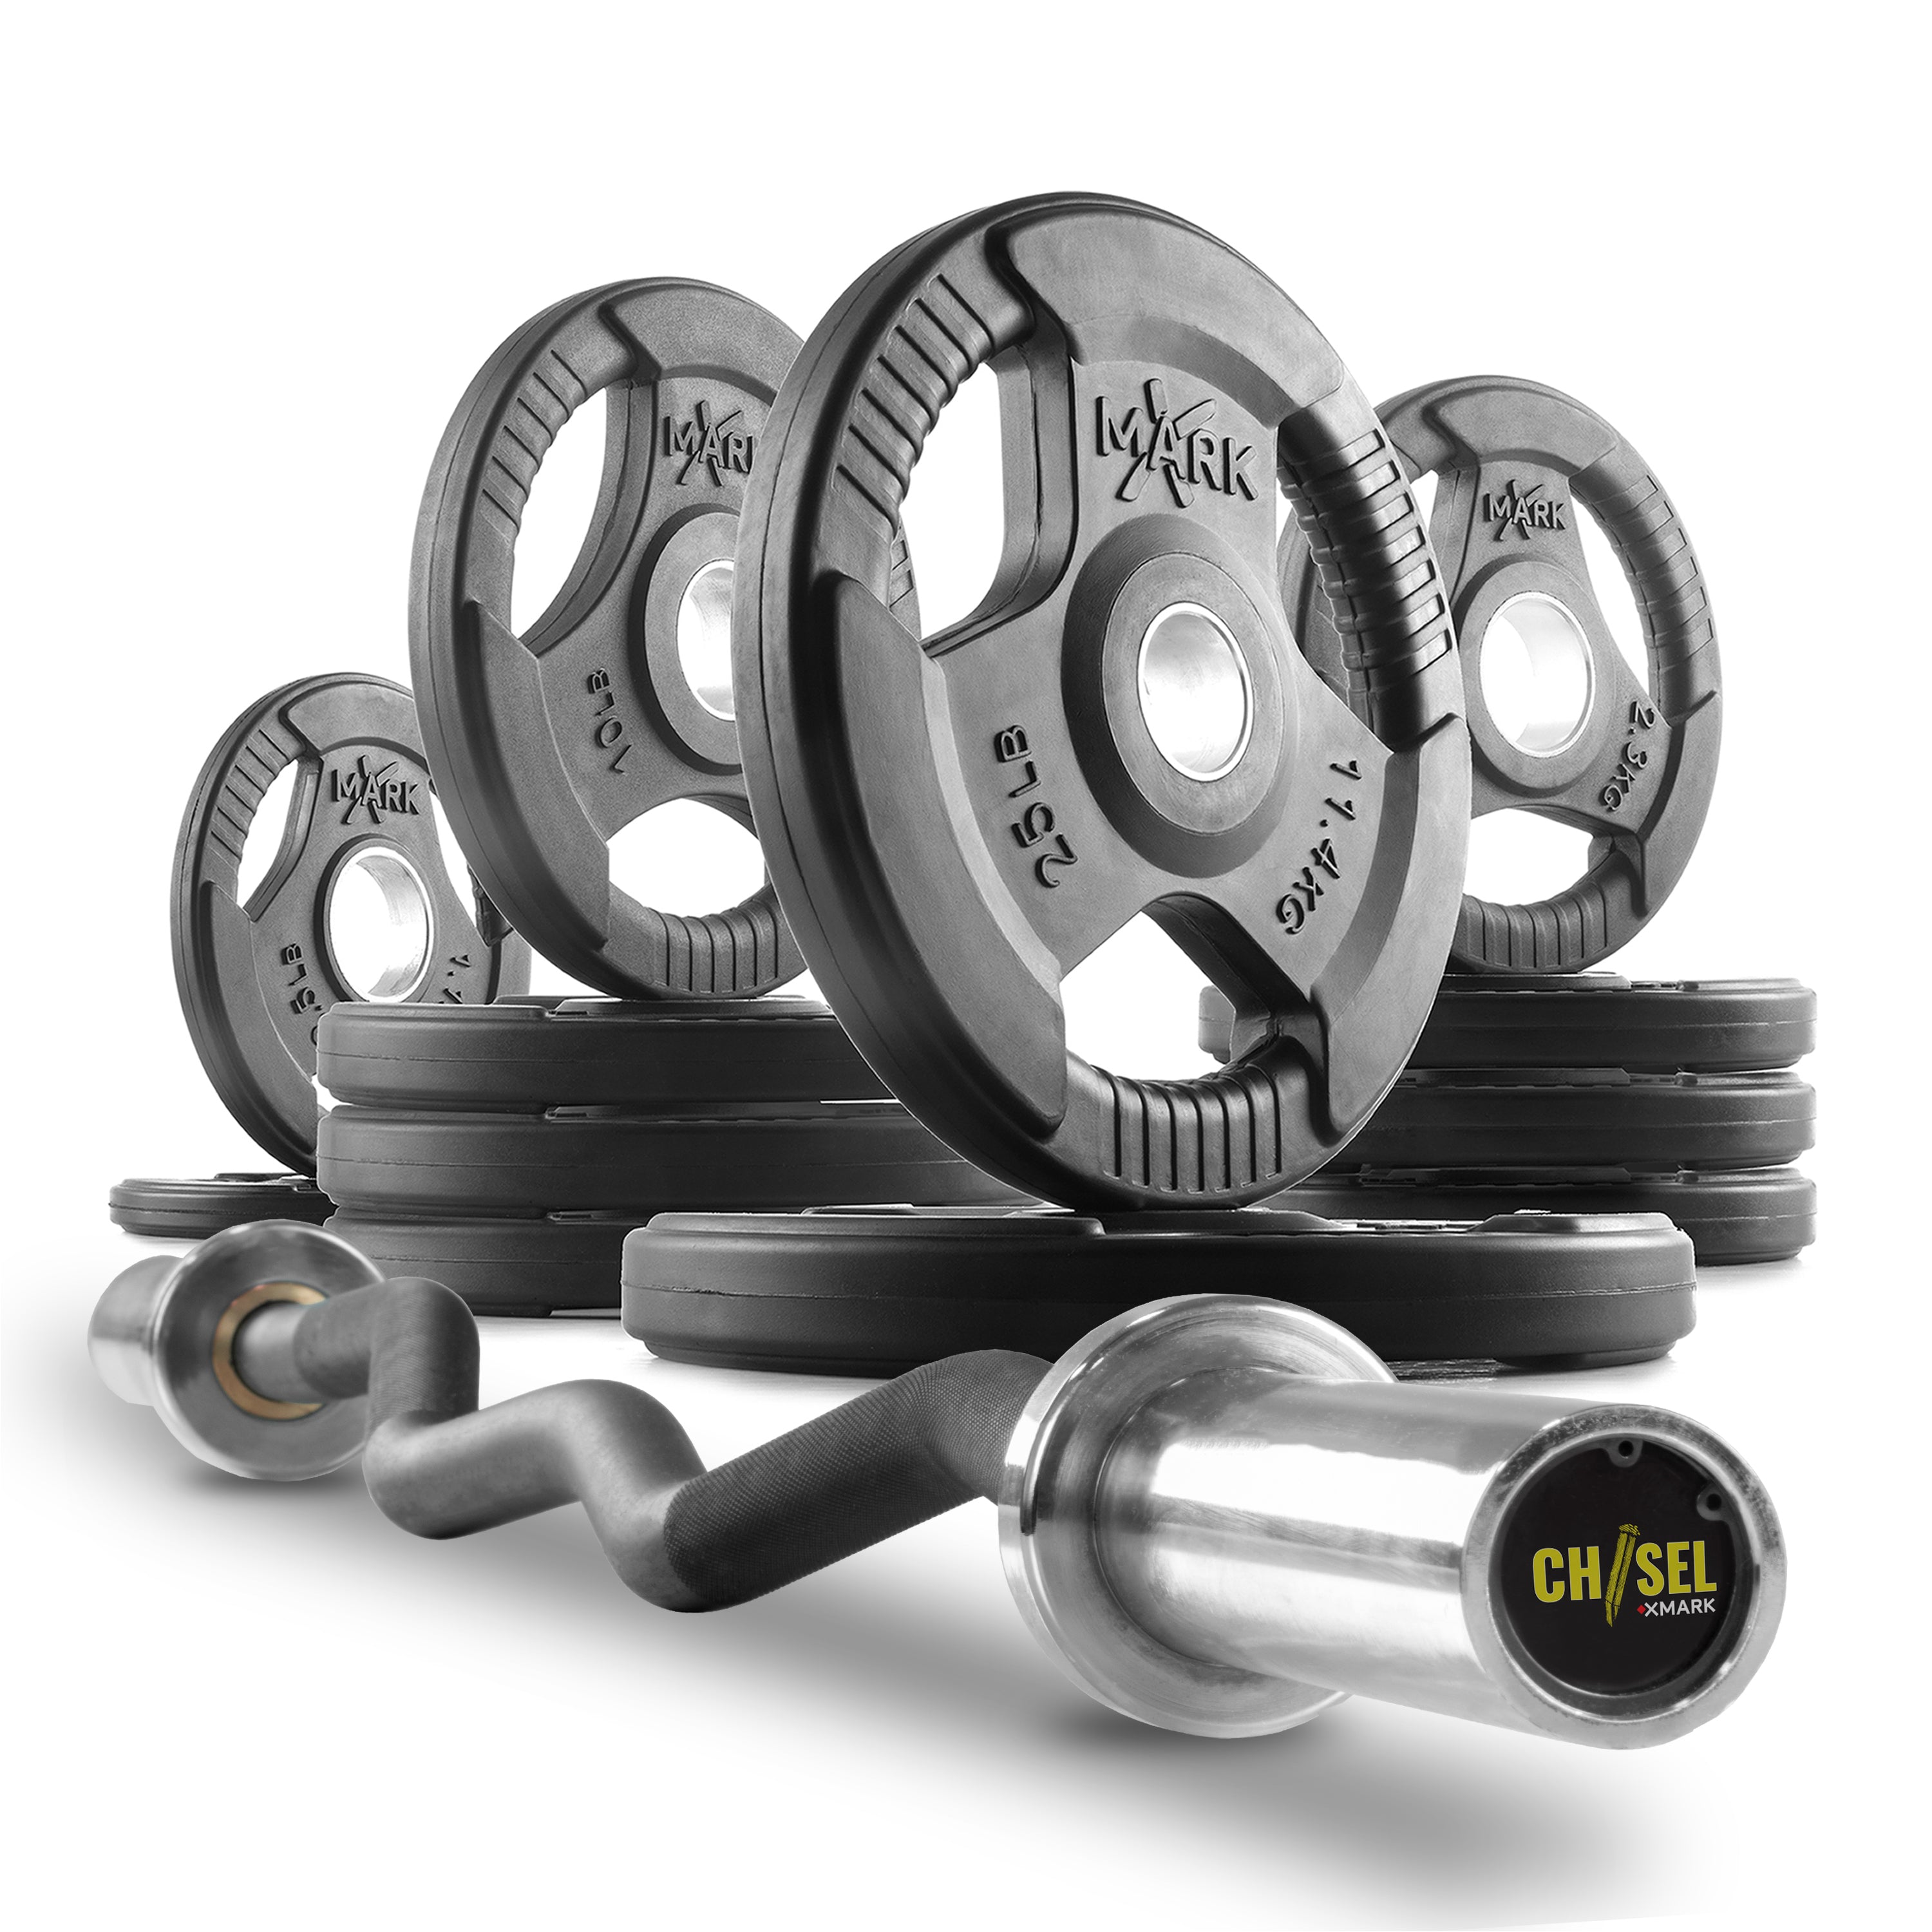 Tri Grip Curl Bar and Weight Plates Set Builder